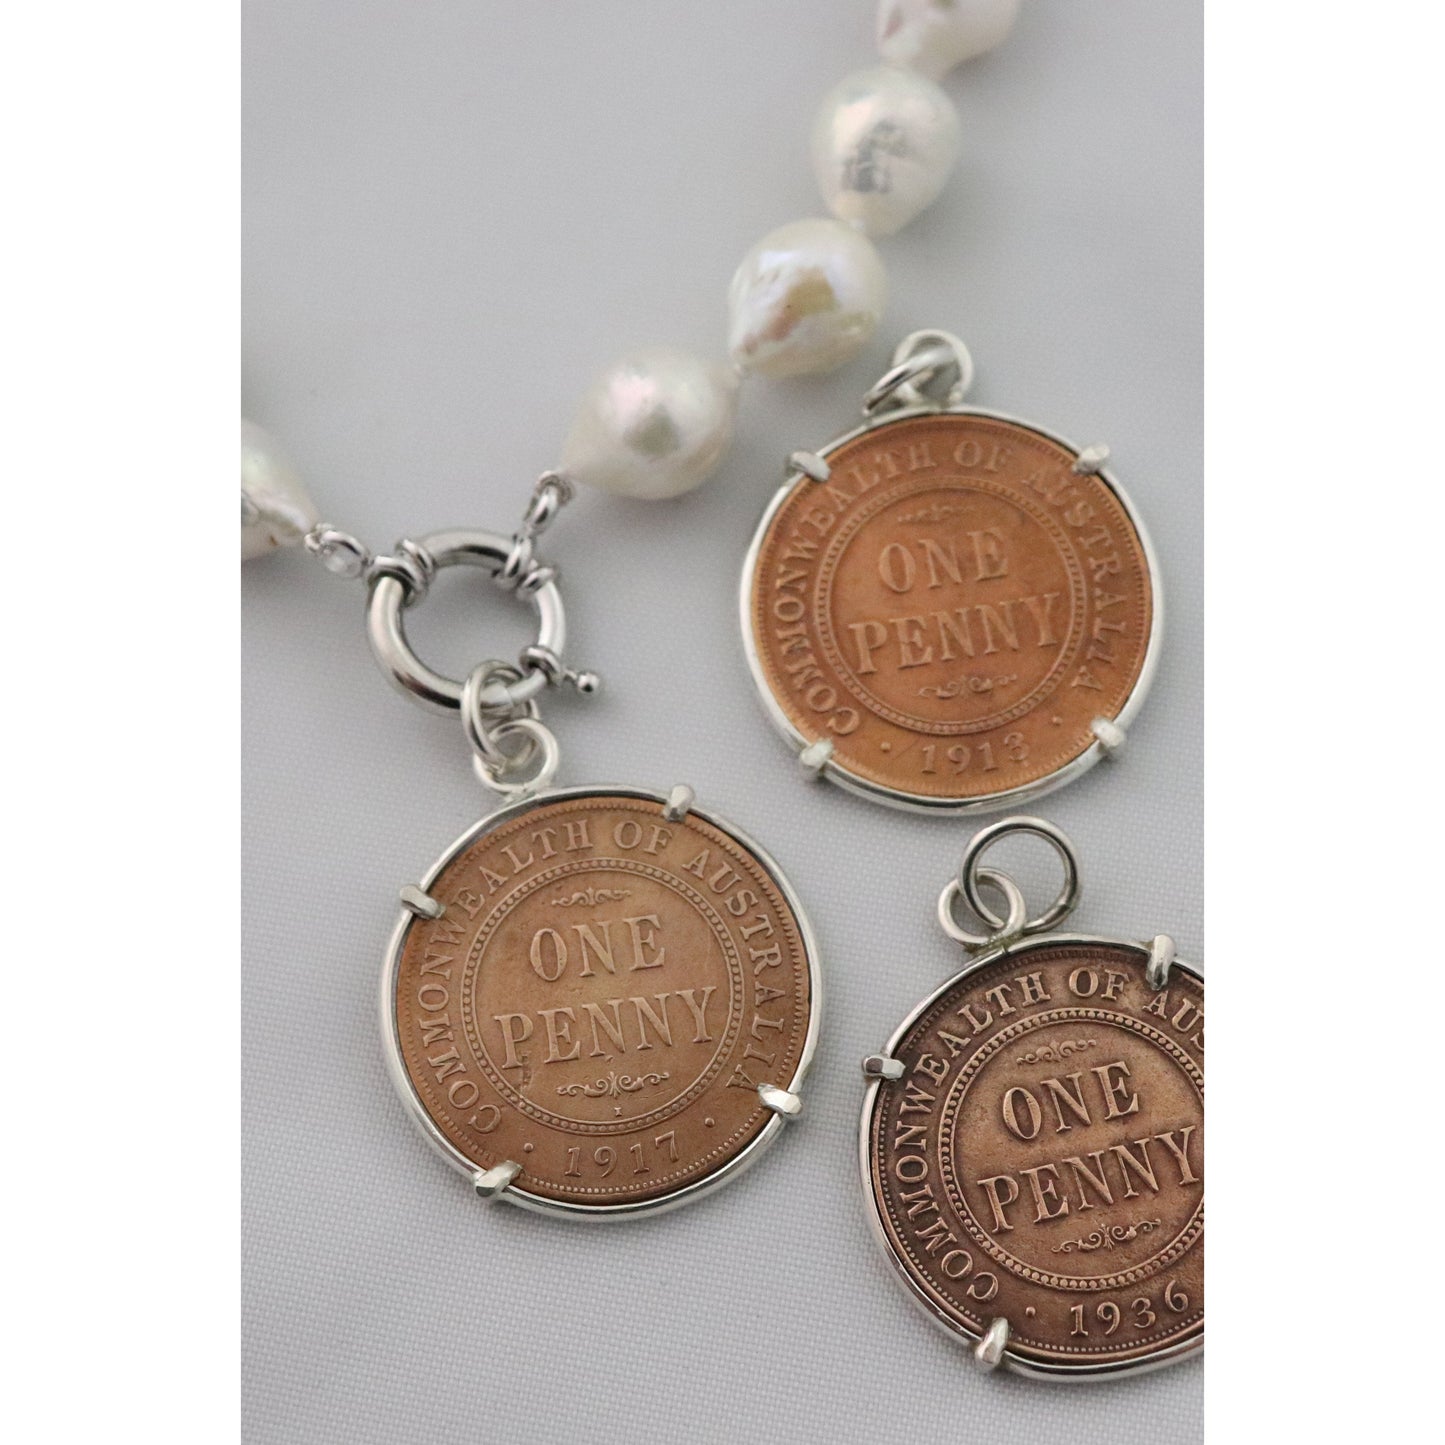 Pearl necklace with penny pendants.